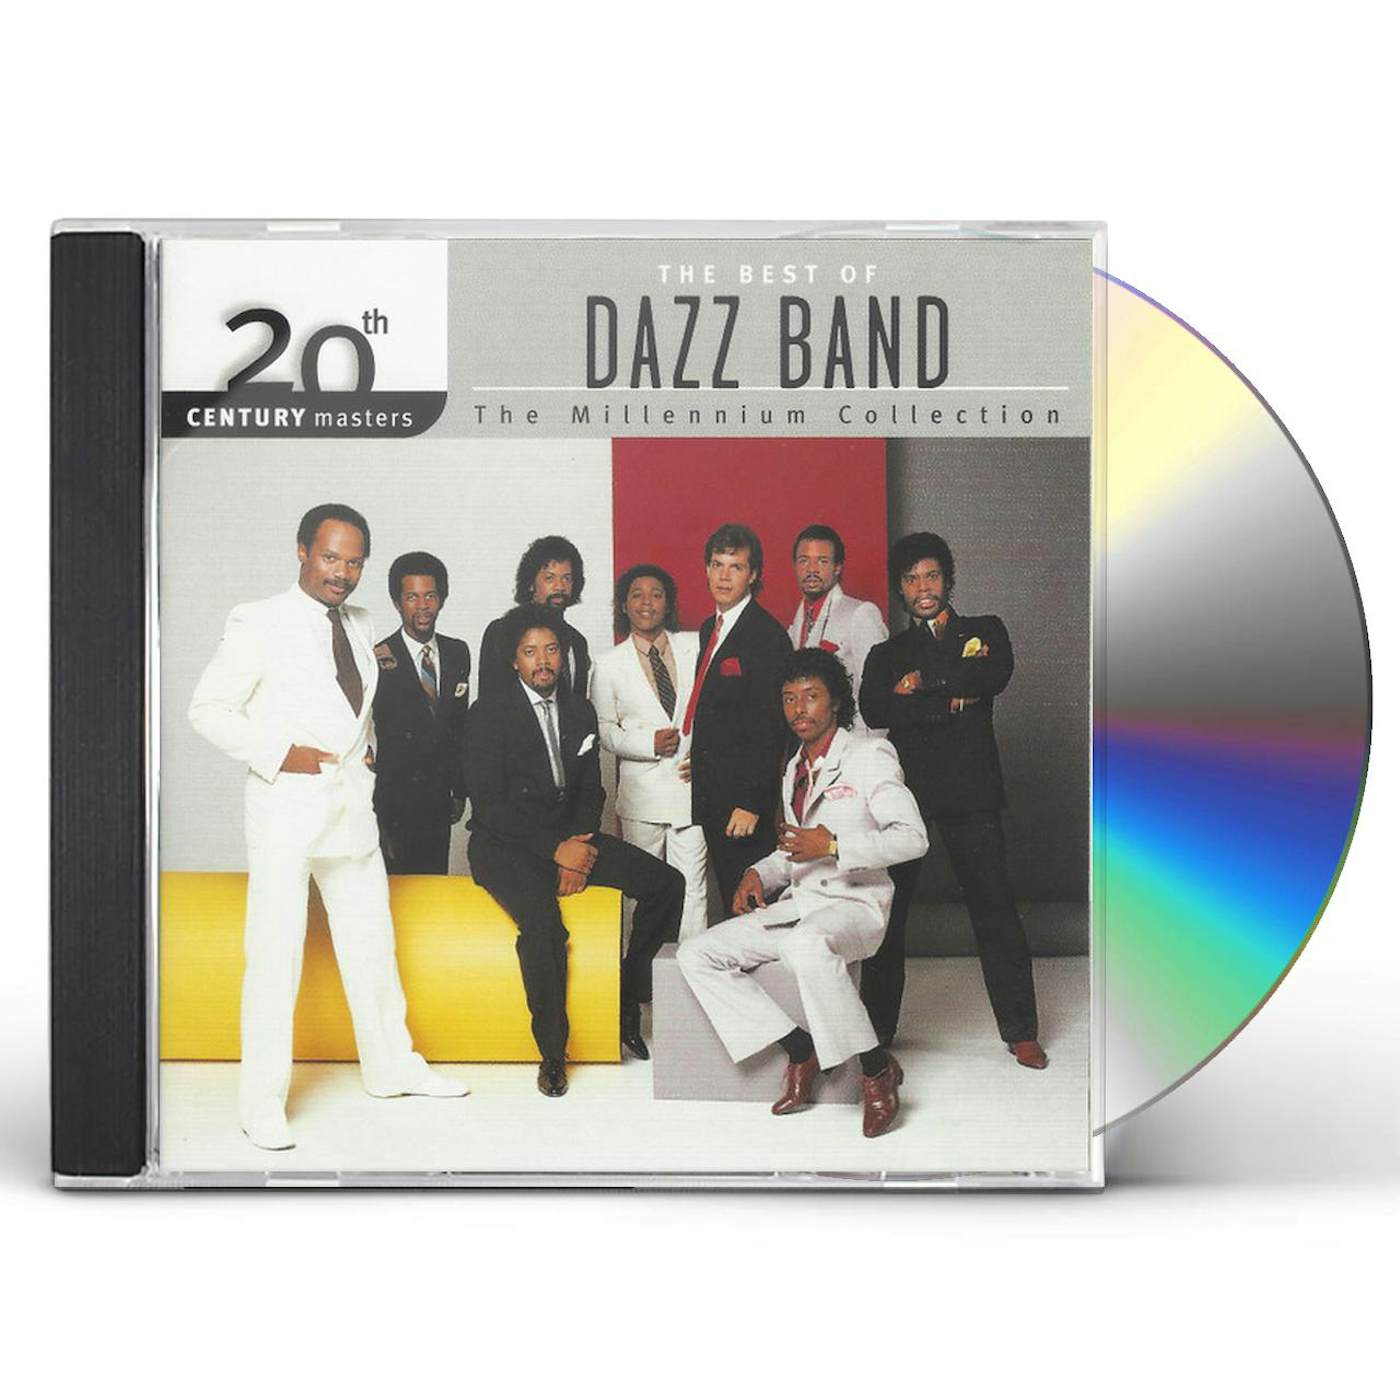 Dazz Band 20TH CENTURY MASTERS: MILLENNIUM COLLECTION CD